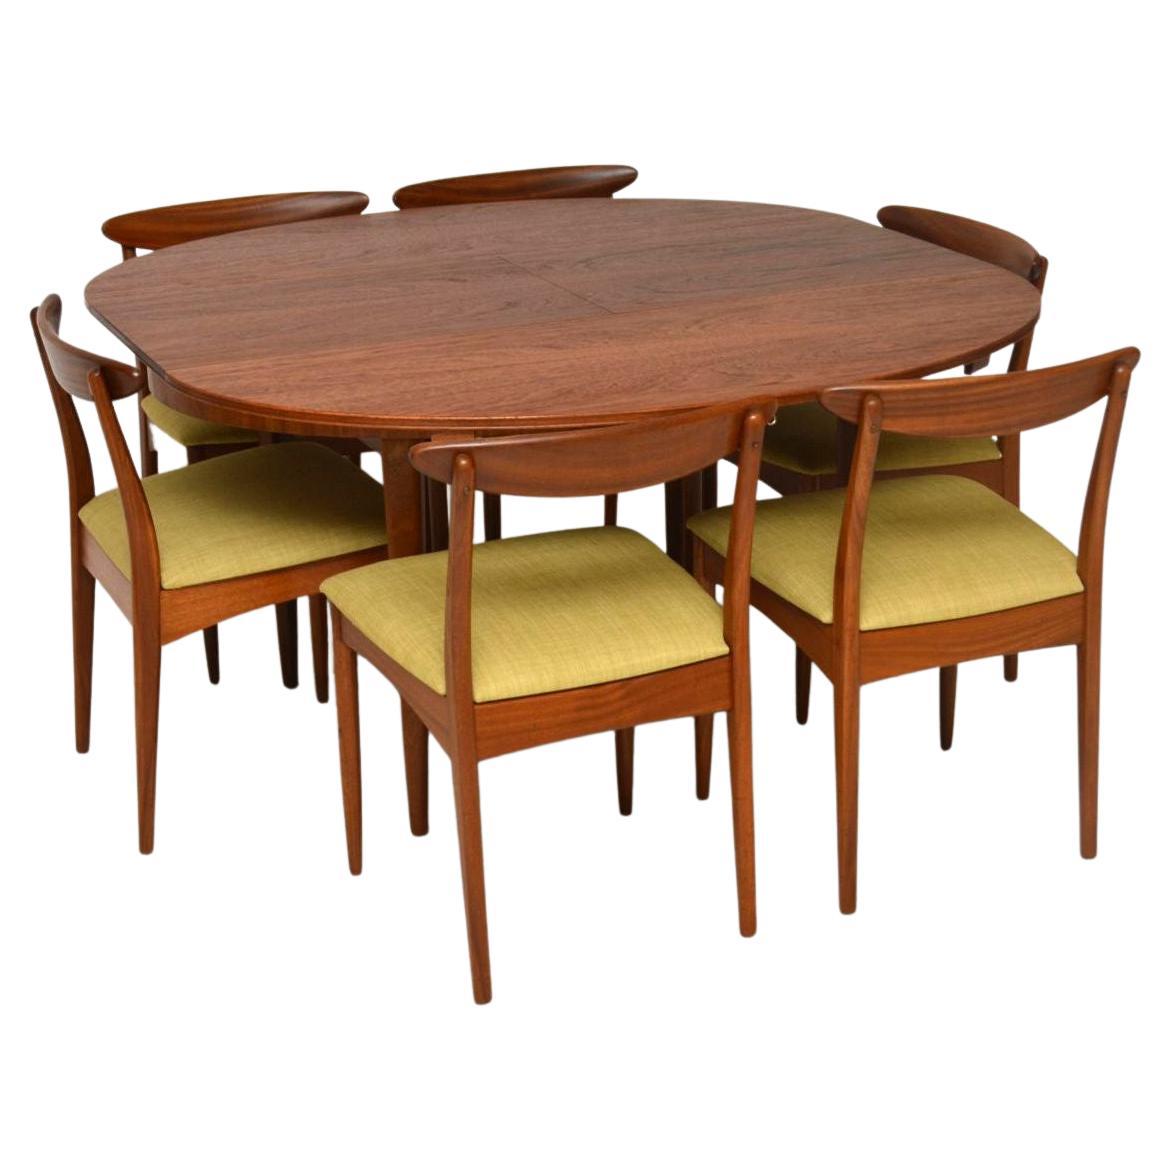 1960's Teak Dining Table and 6 Chairs by Greaves & Thomas